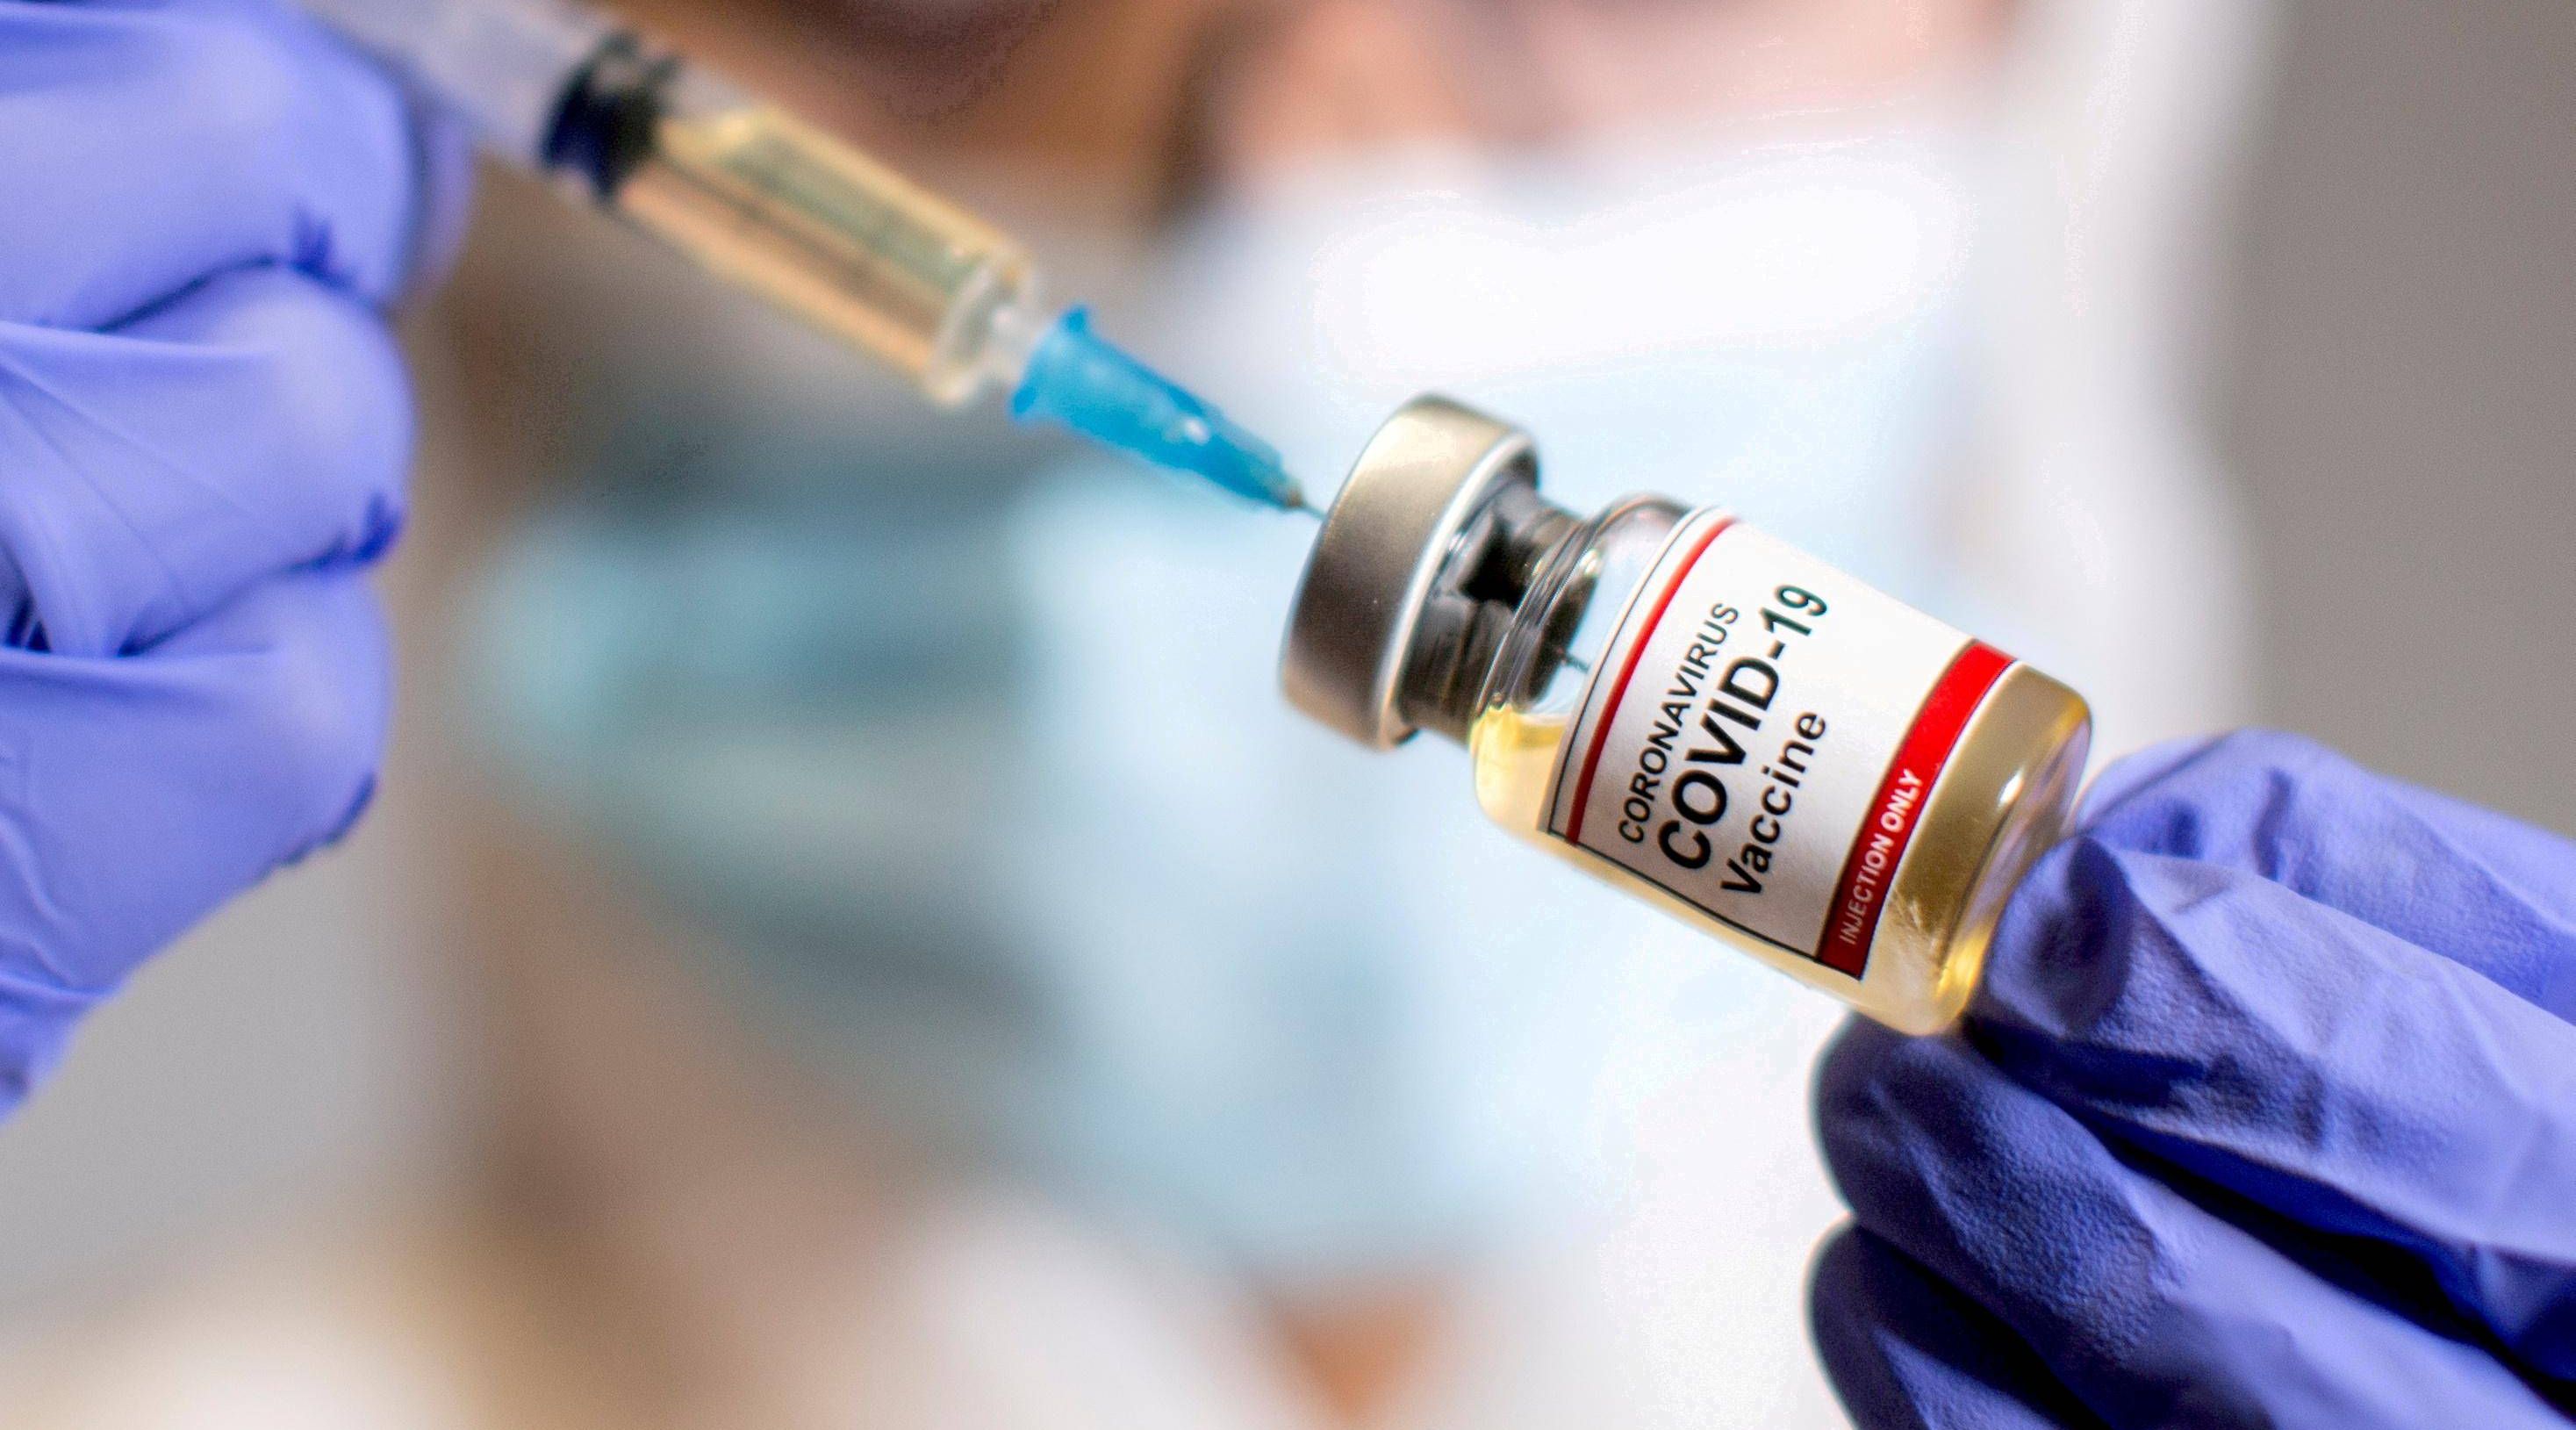 UAE leads in global rankings for COVID-19 vaccination rates